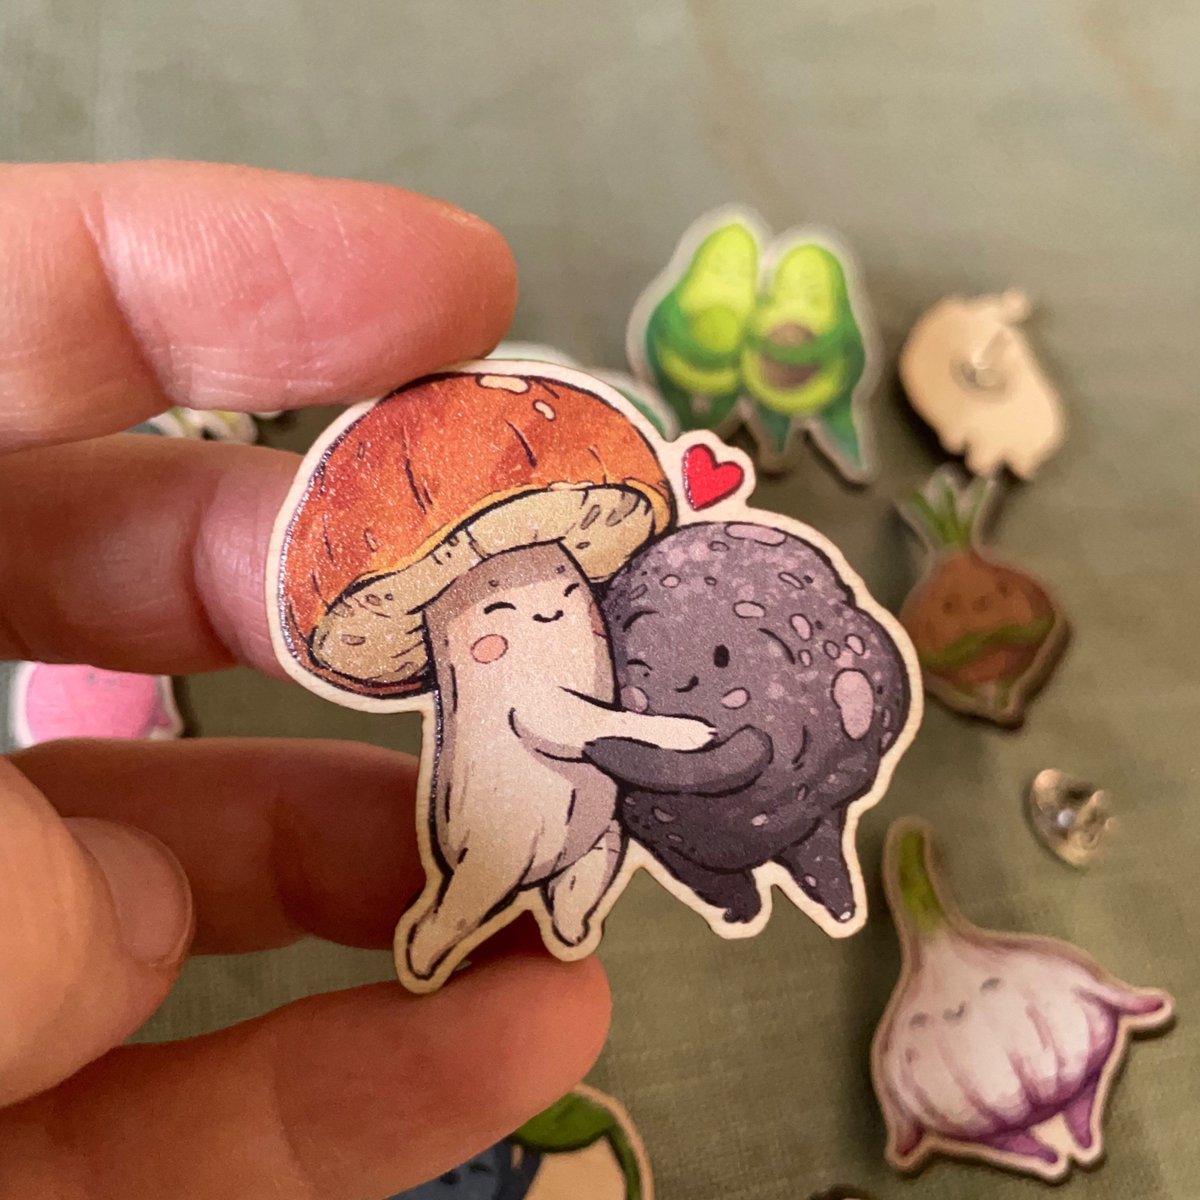 Wooden pin 🌱 Porcini loves Truffle 💛 Maybe ypu know someone who needs this in their life, also got them as magnet. #mushroom #cuteart #illustration #cuteillustration #art #pindesign #sustainable #smallbusiness #cute #peocreate